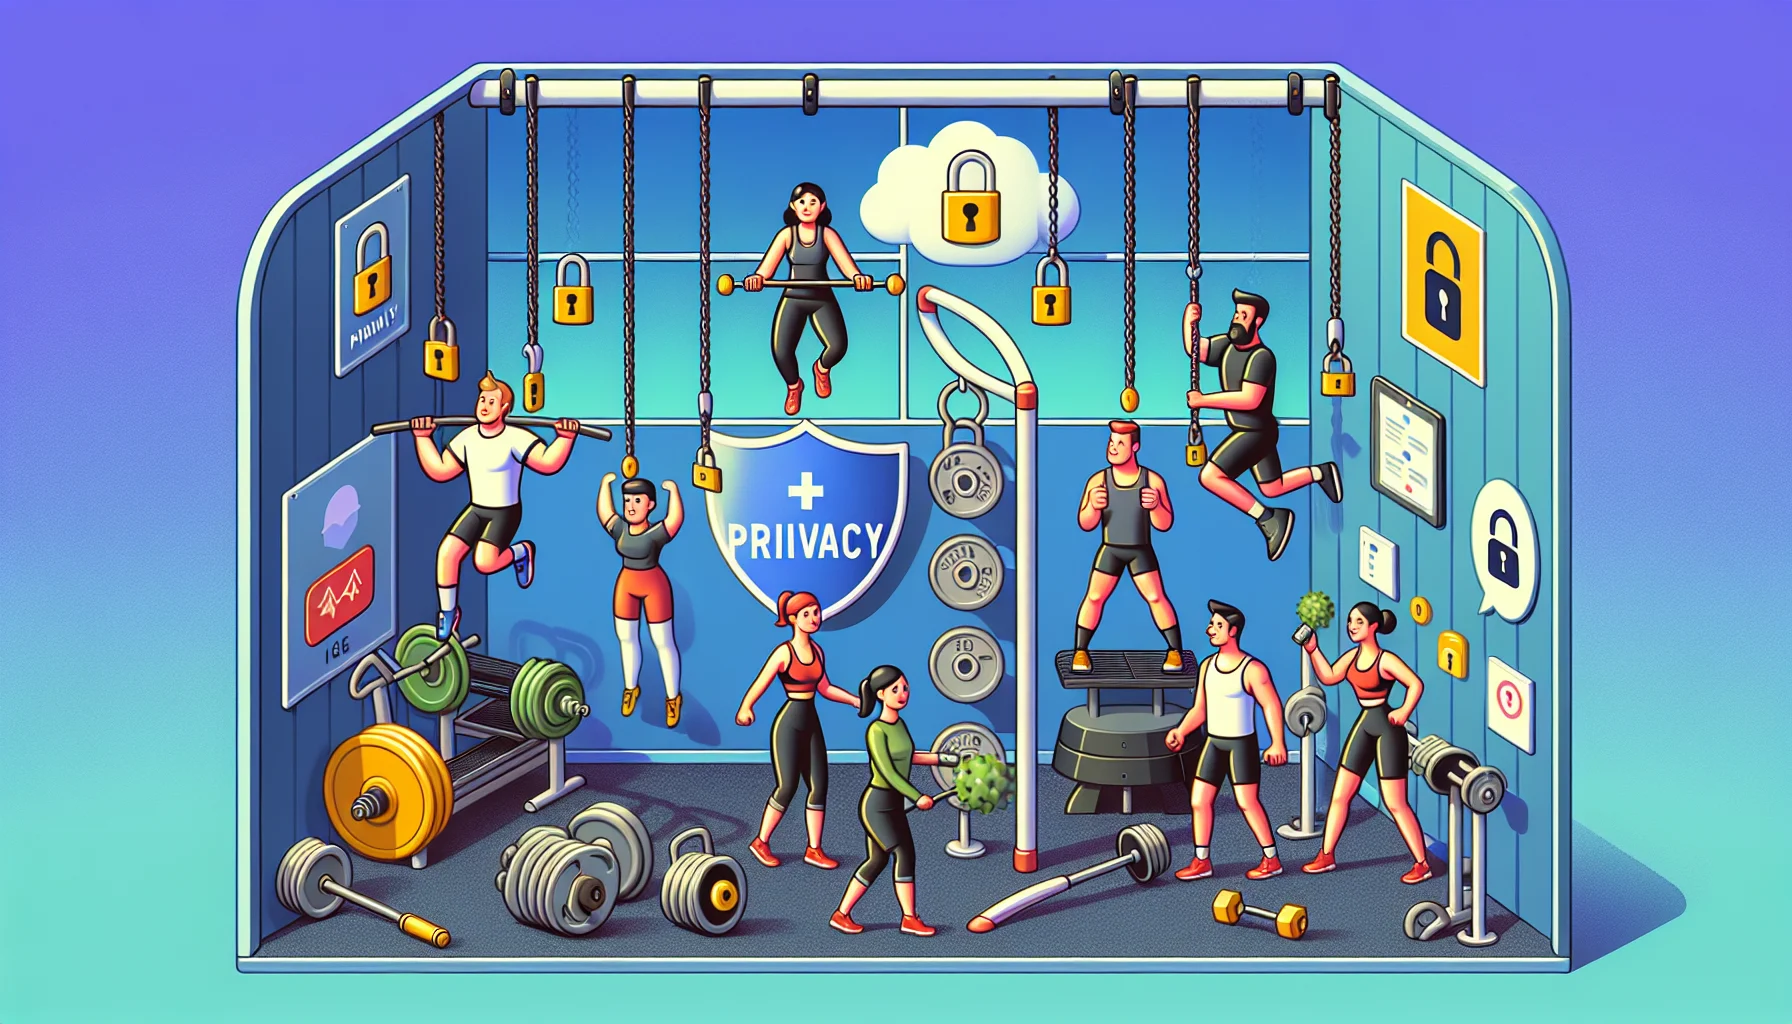 Create a humour-filled, engaging image representing the concept of safeguarding personal health data during physical fitness activities. The scene should depict a gym with people from diverse descents such as Caucasian, Hispanic and Middle-Eastern working out using various fitness equipment. However, they're not just working out - they are protecting their personal health data. Perhaps there's a comical scene such as a woman jumping rope with a shield labeled 'Privacy', or a man lifting weights that have locks instead of plates. This image should raise a smile and encourage people to be aware of privacy while also motivating them towards physical fitness.